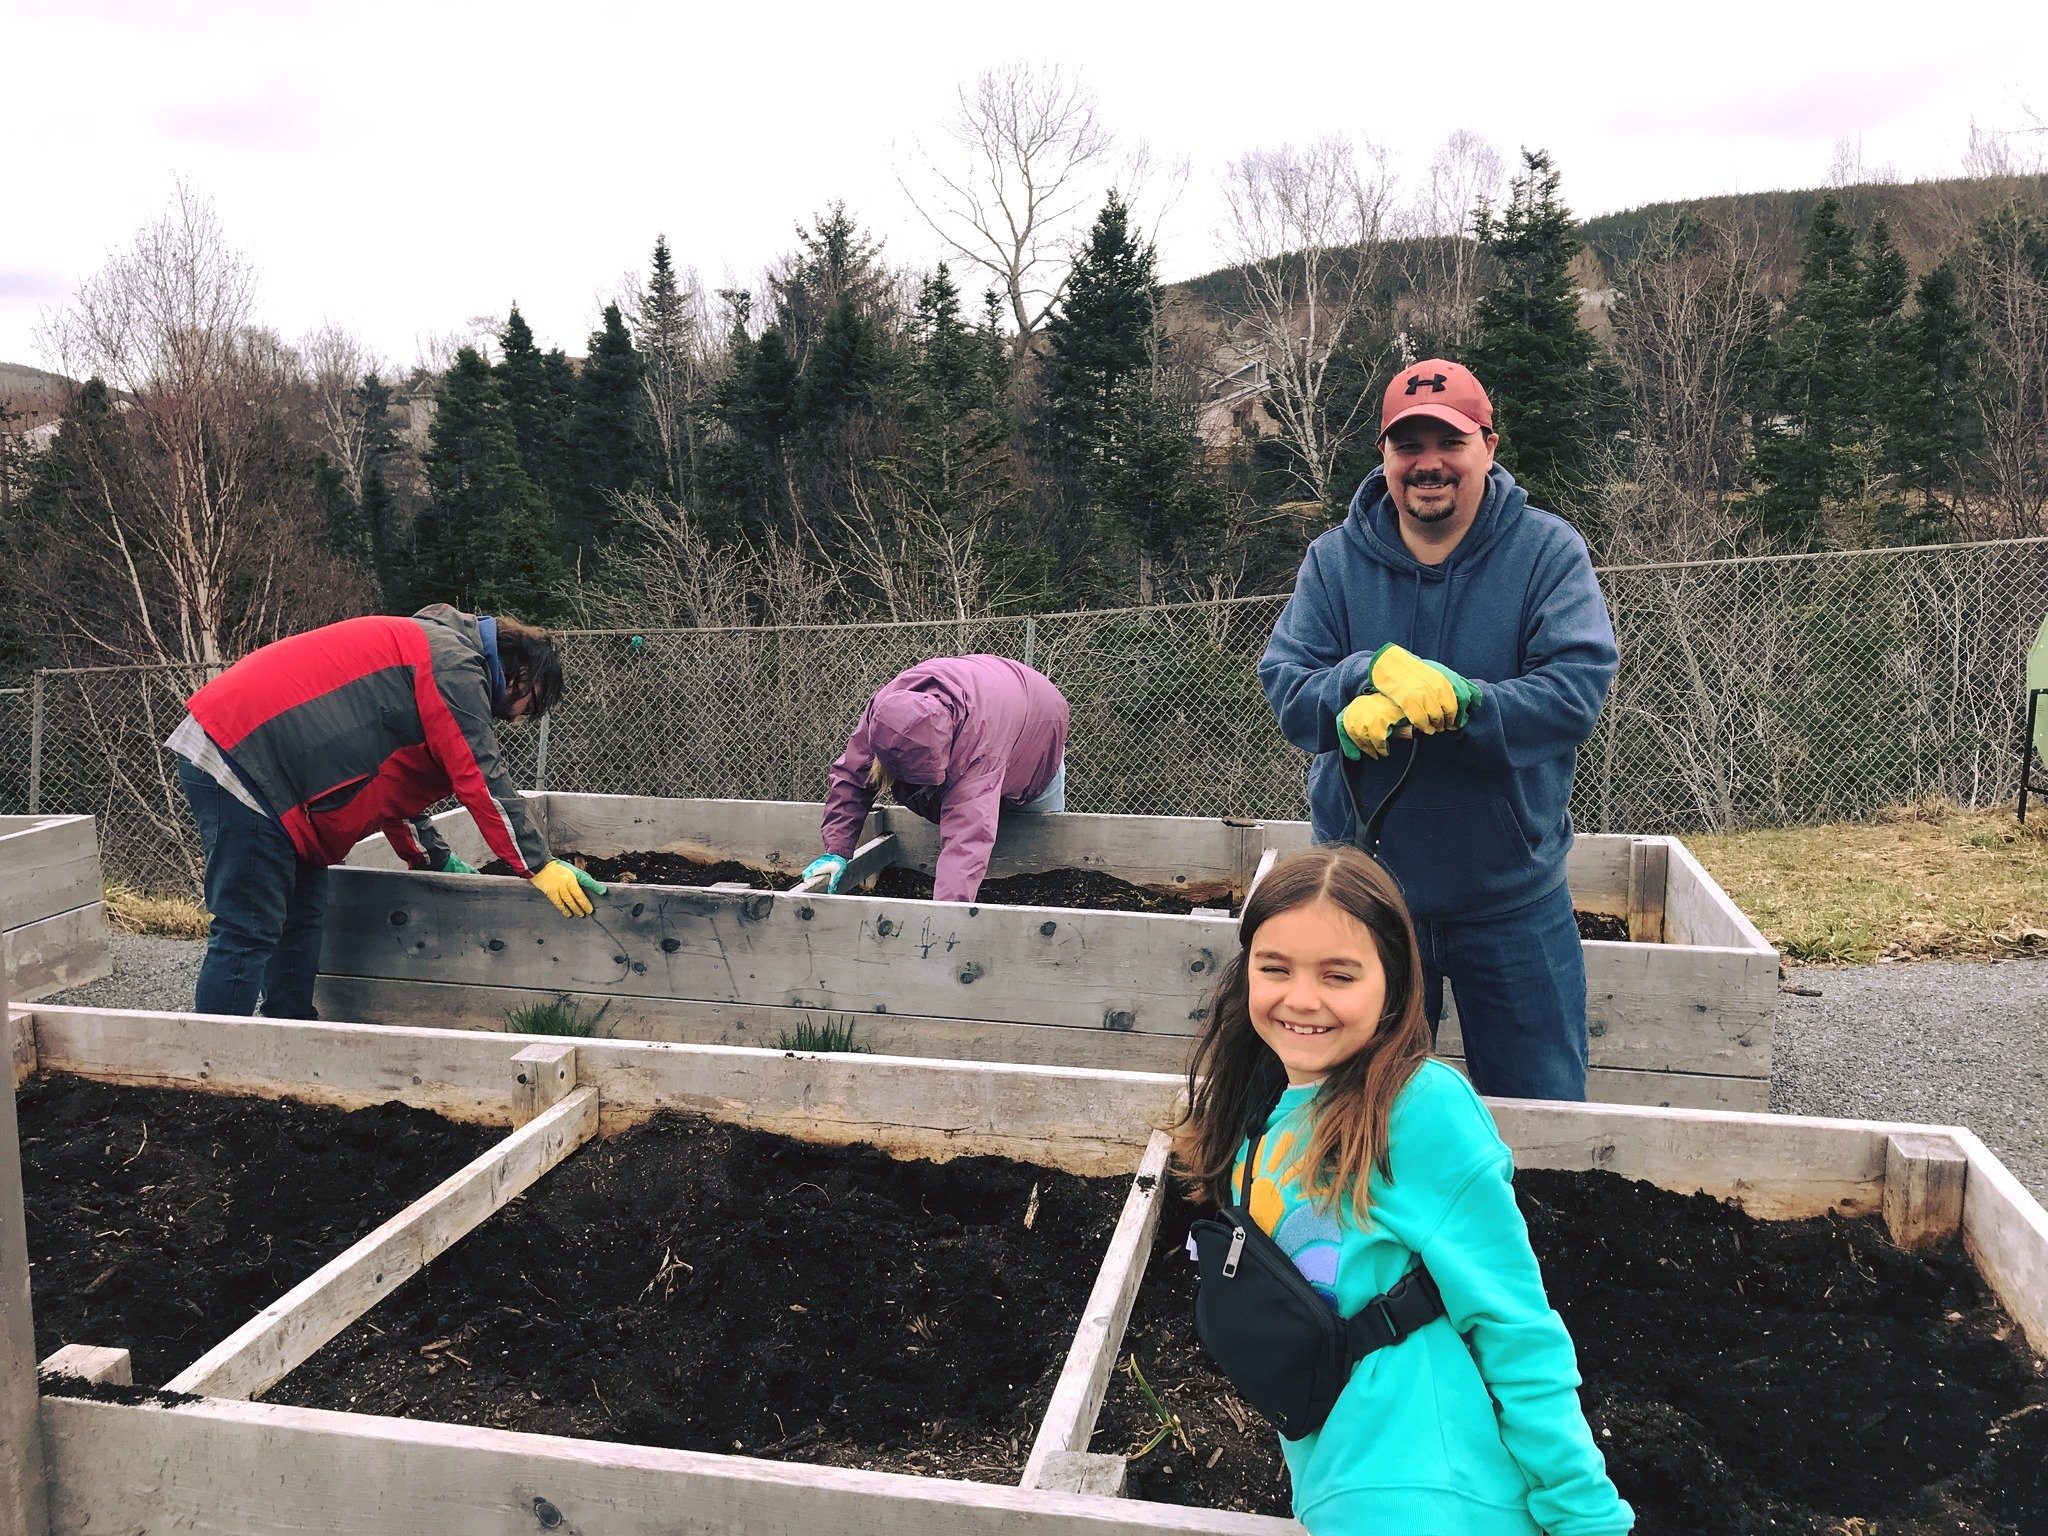 Another weekend, another garden party! Join us at the Caribou Road Garden on Saturday to help prepare for the upcoming gardening season! We'll tidy up the garden and shed, sift compost, and have a chat with fellow gardeners.

RSVP to info@wecnl.ca or